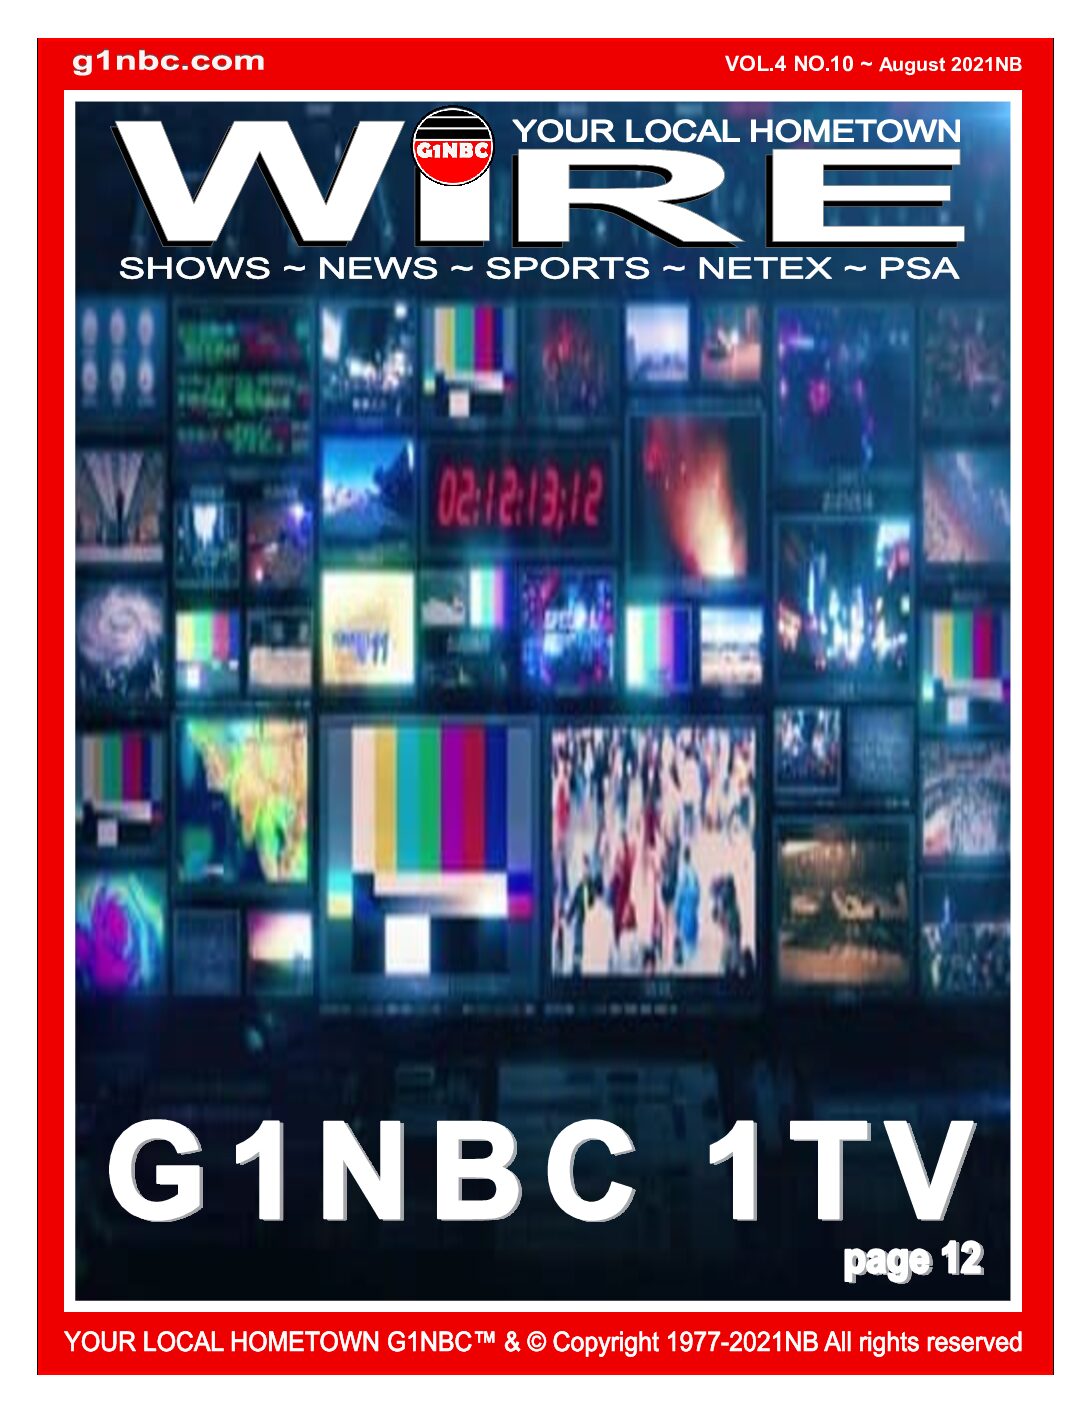 G1NBC WiRE August 2021NB